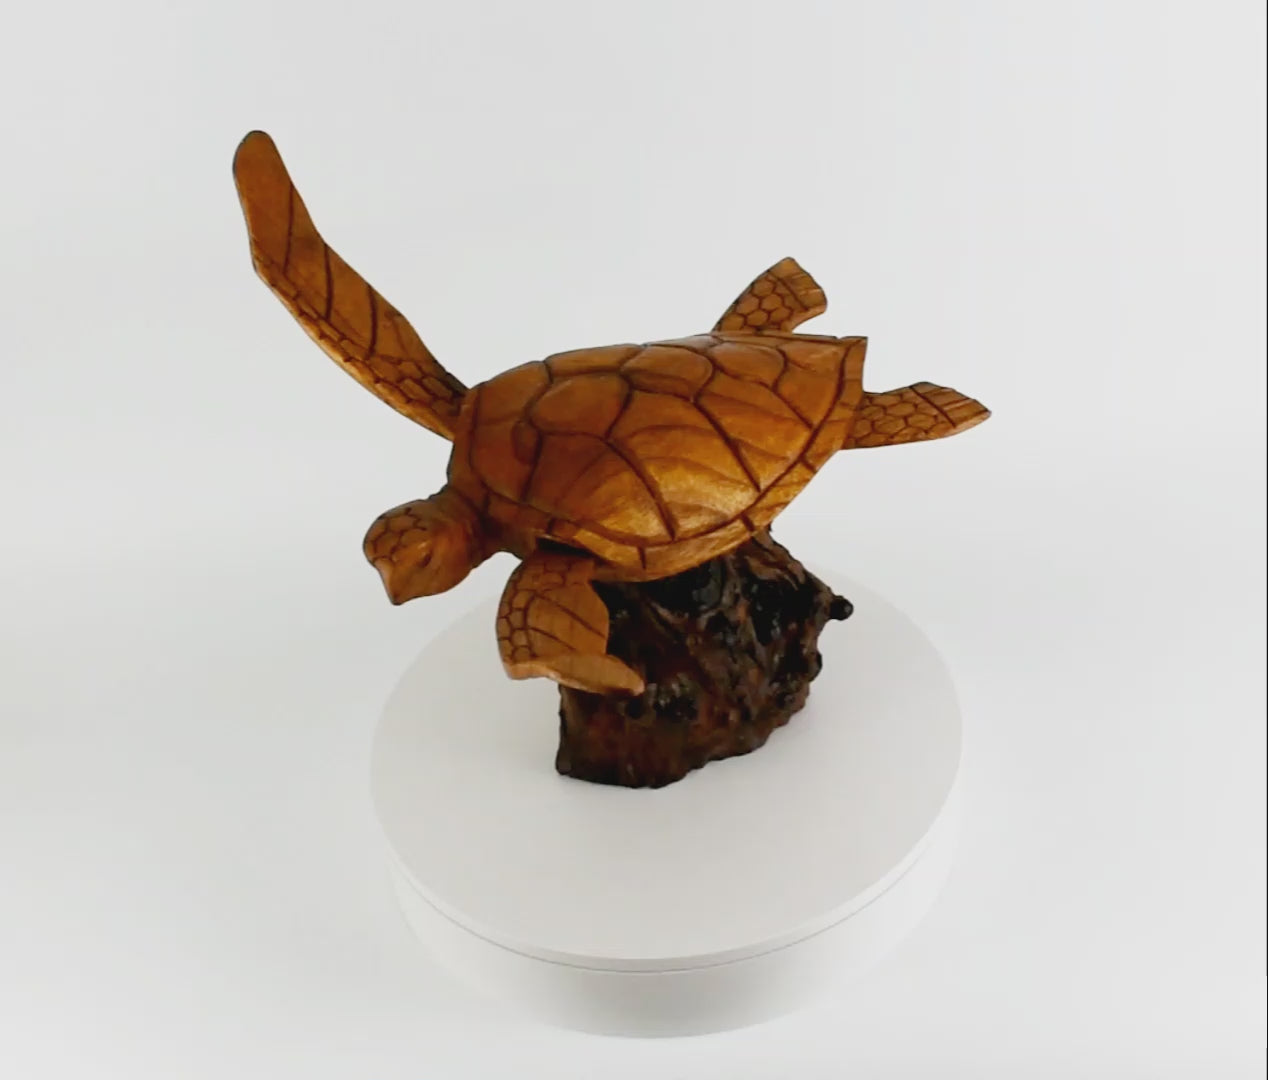 Wooden Hand Carved Turtle on Coral Statue Sculpture Wood Home Decor Figurine Handcrafted Handmade Seaside Tropical Nautical Ocean Coastal Tortoise